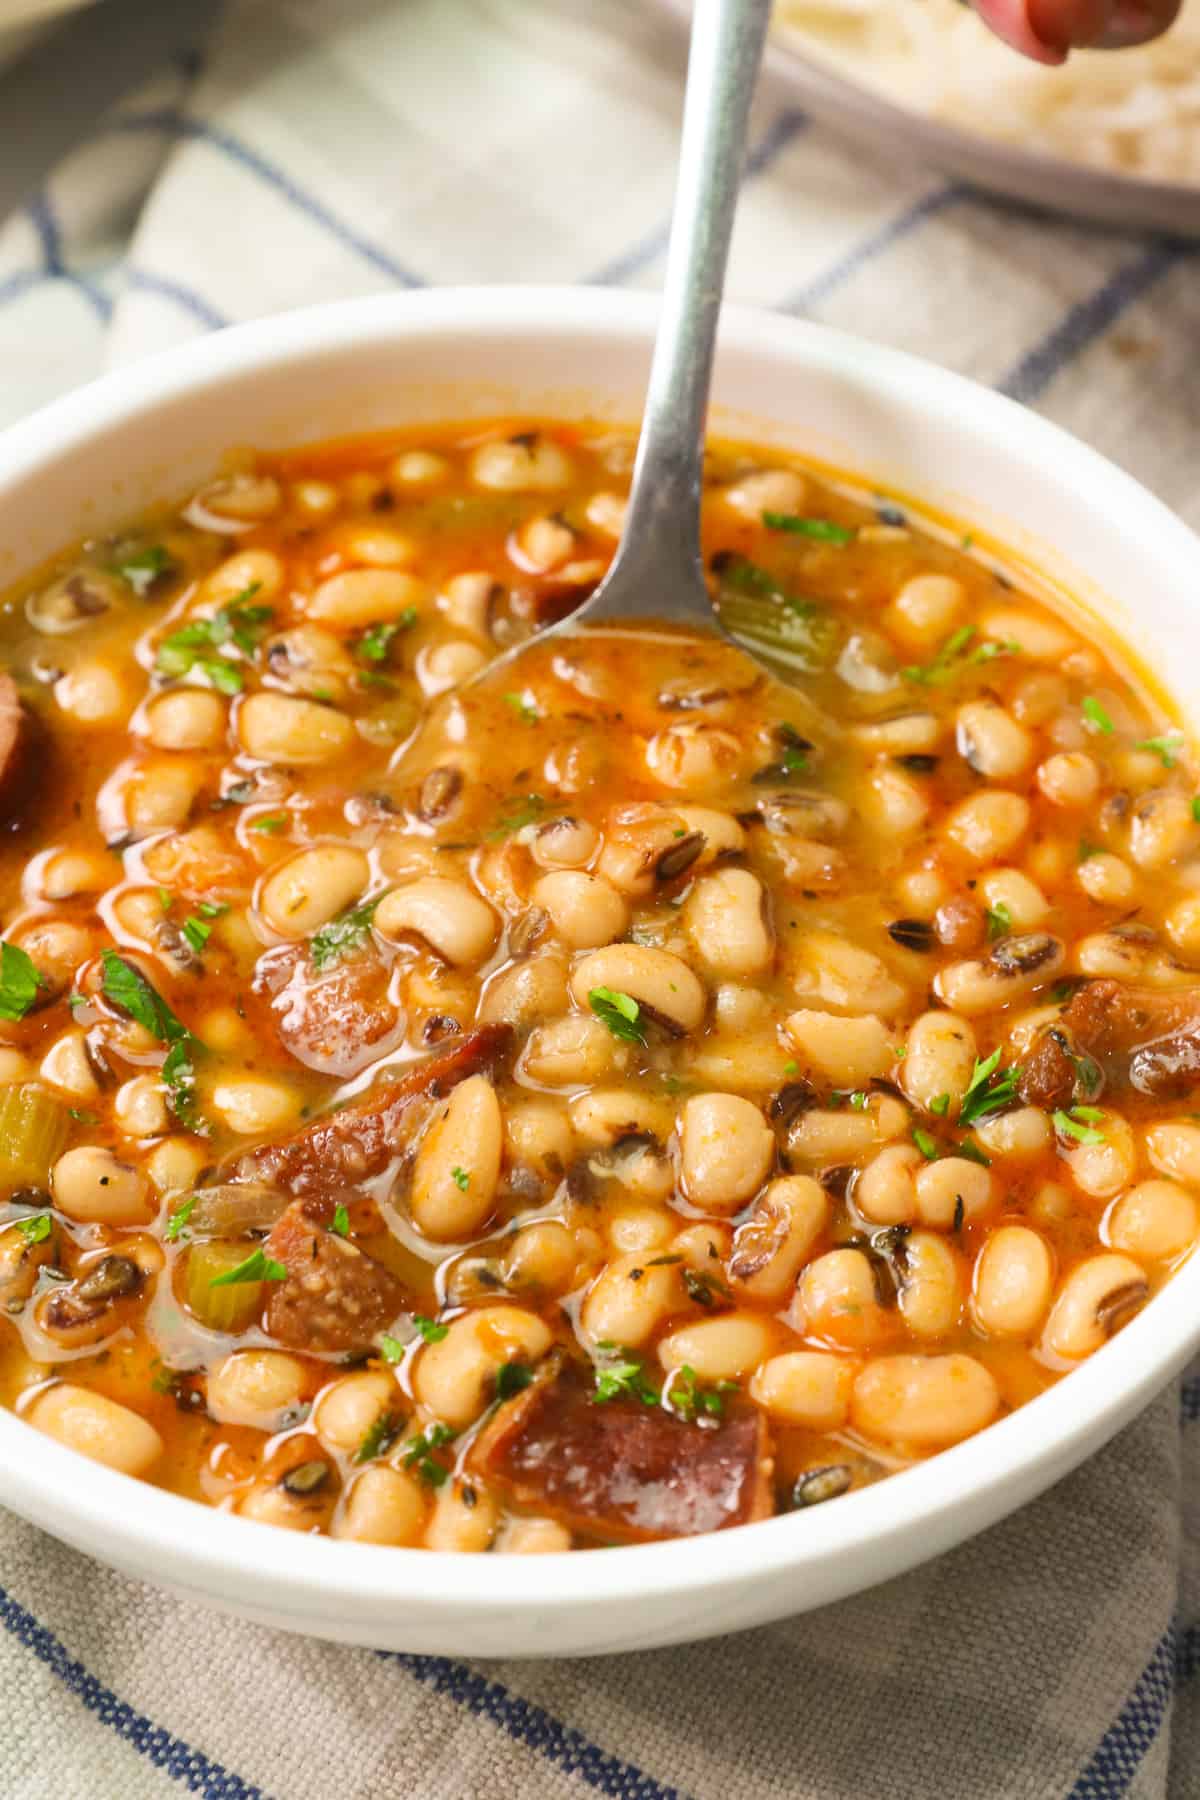 Slow Cooker Black Eyed Peas Recipe - The Magical Slow Cooker